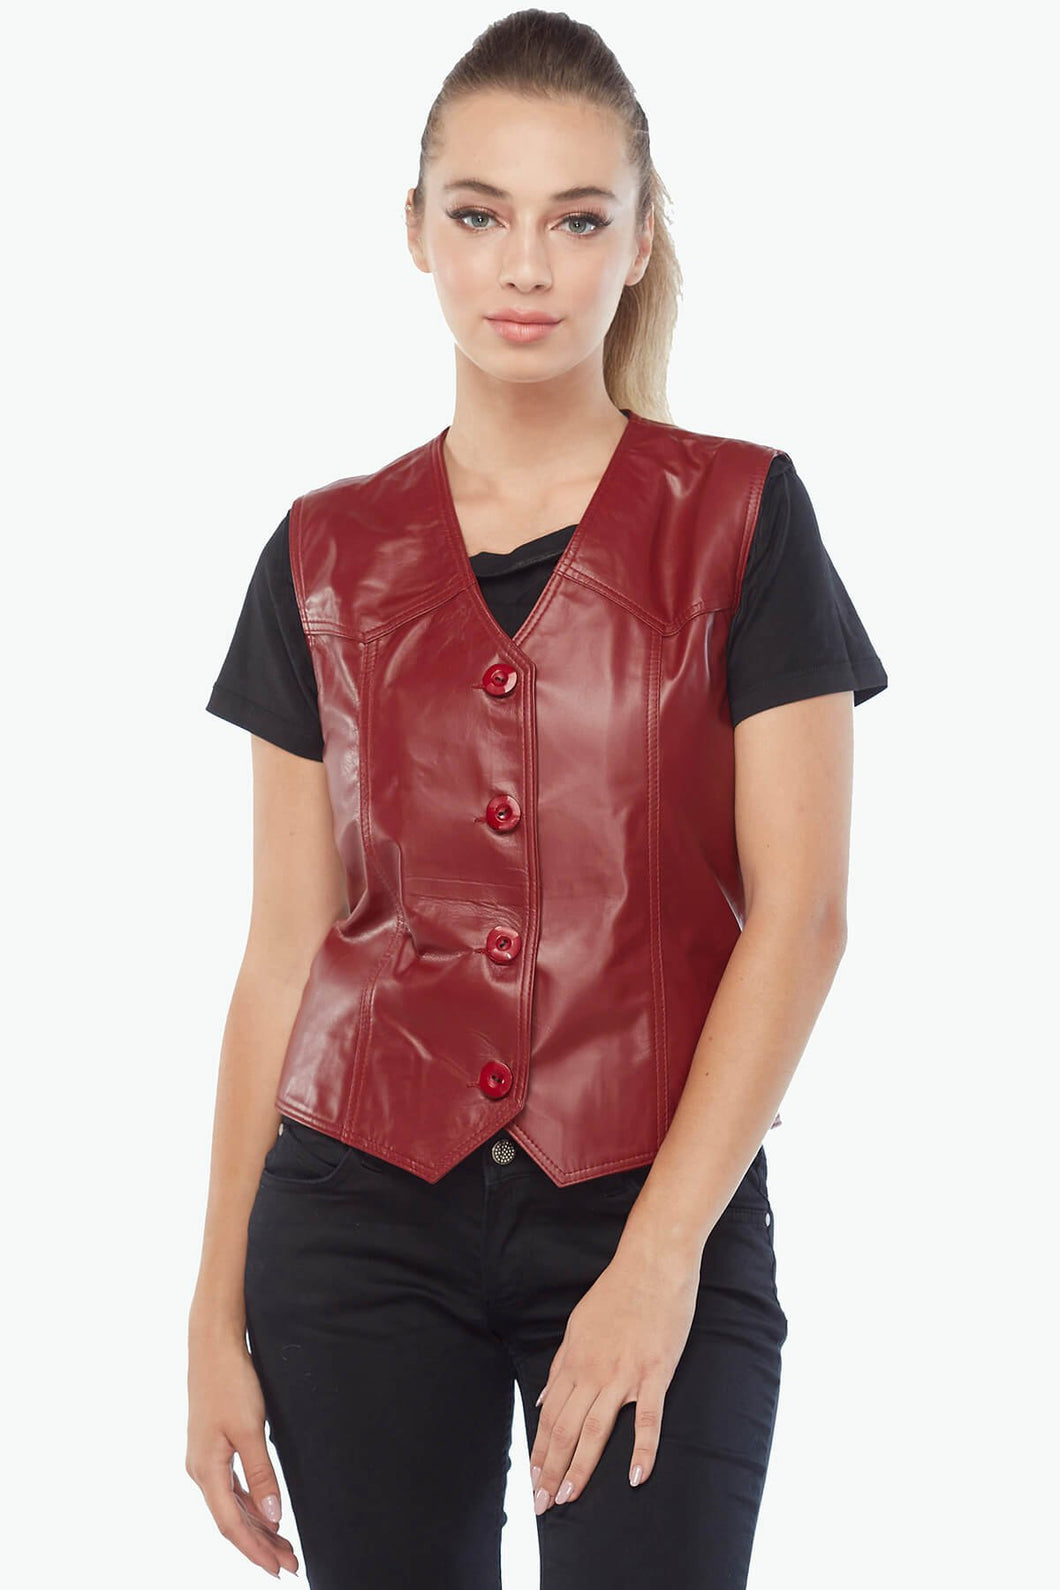 Genuine Leather Red Women's Leather Vest